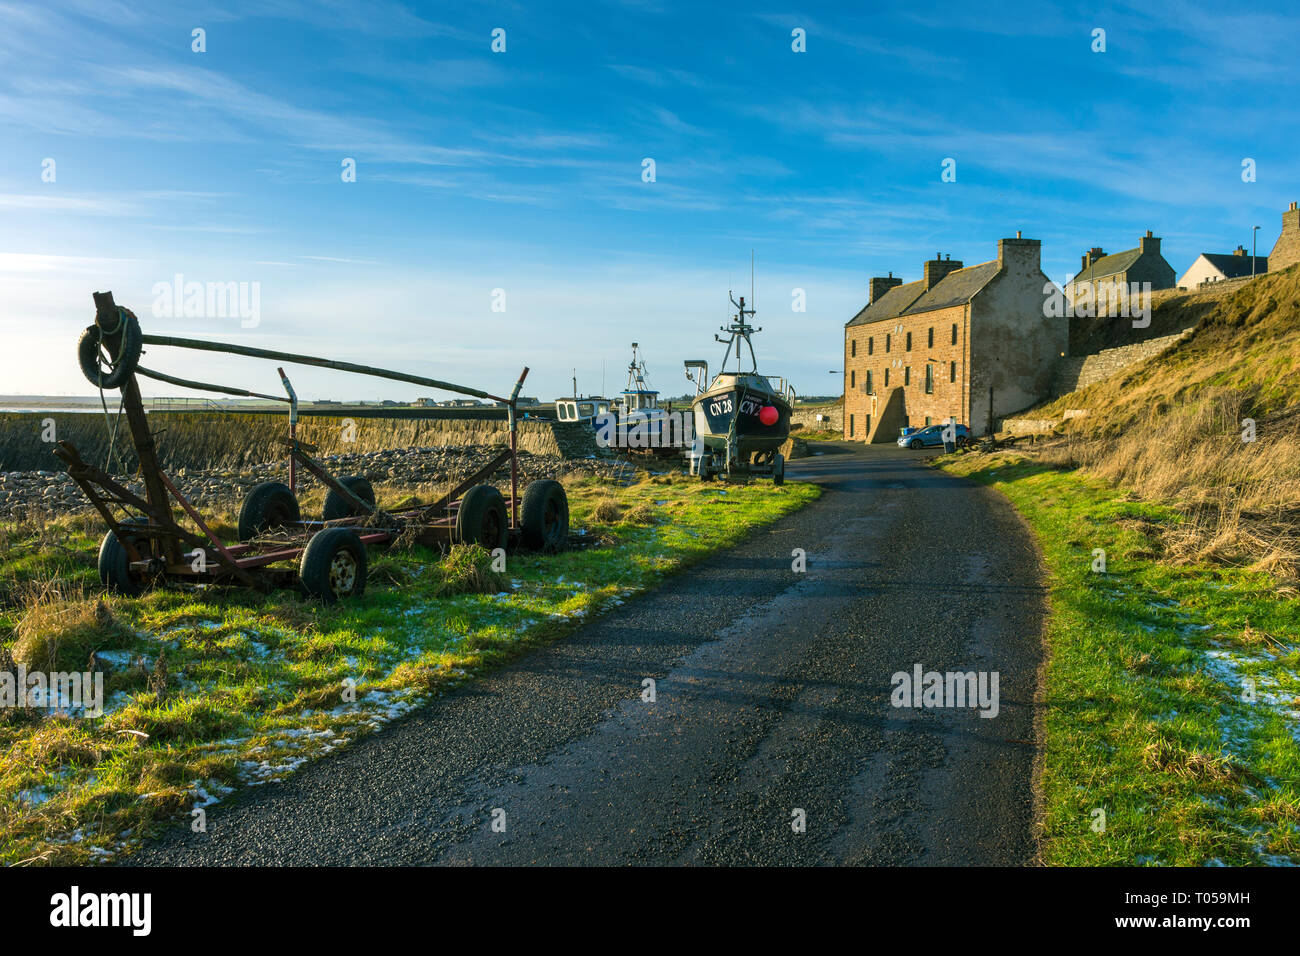 The Harbour House at Keiss, harbour.  Built c1831, formerly a fishing warehouse, now converted to a holiday home.  Keiss, Caithness, Scotland, UK Stock Photo